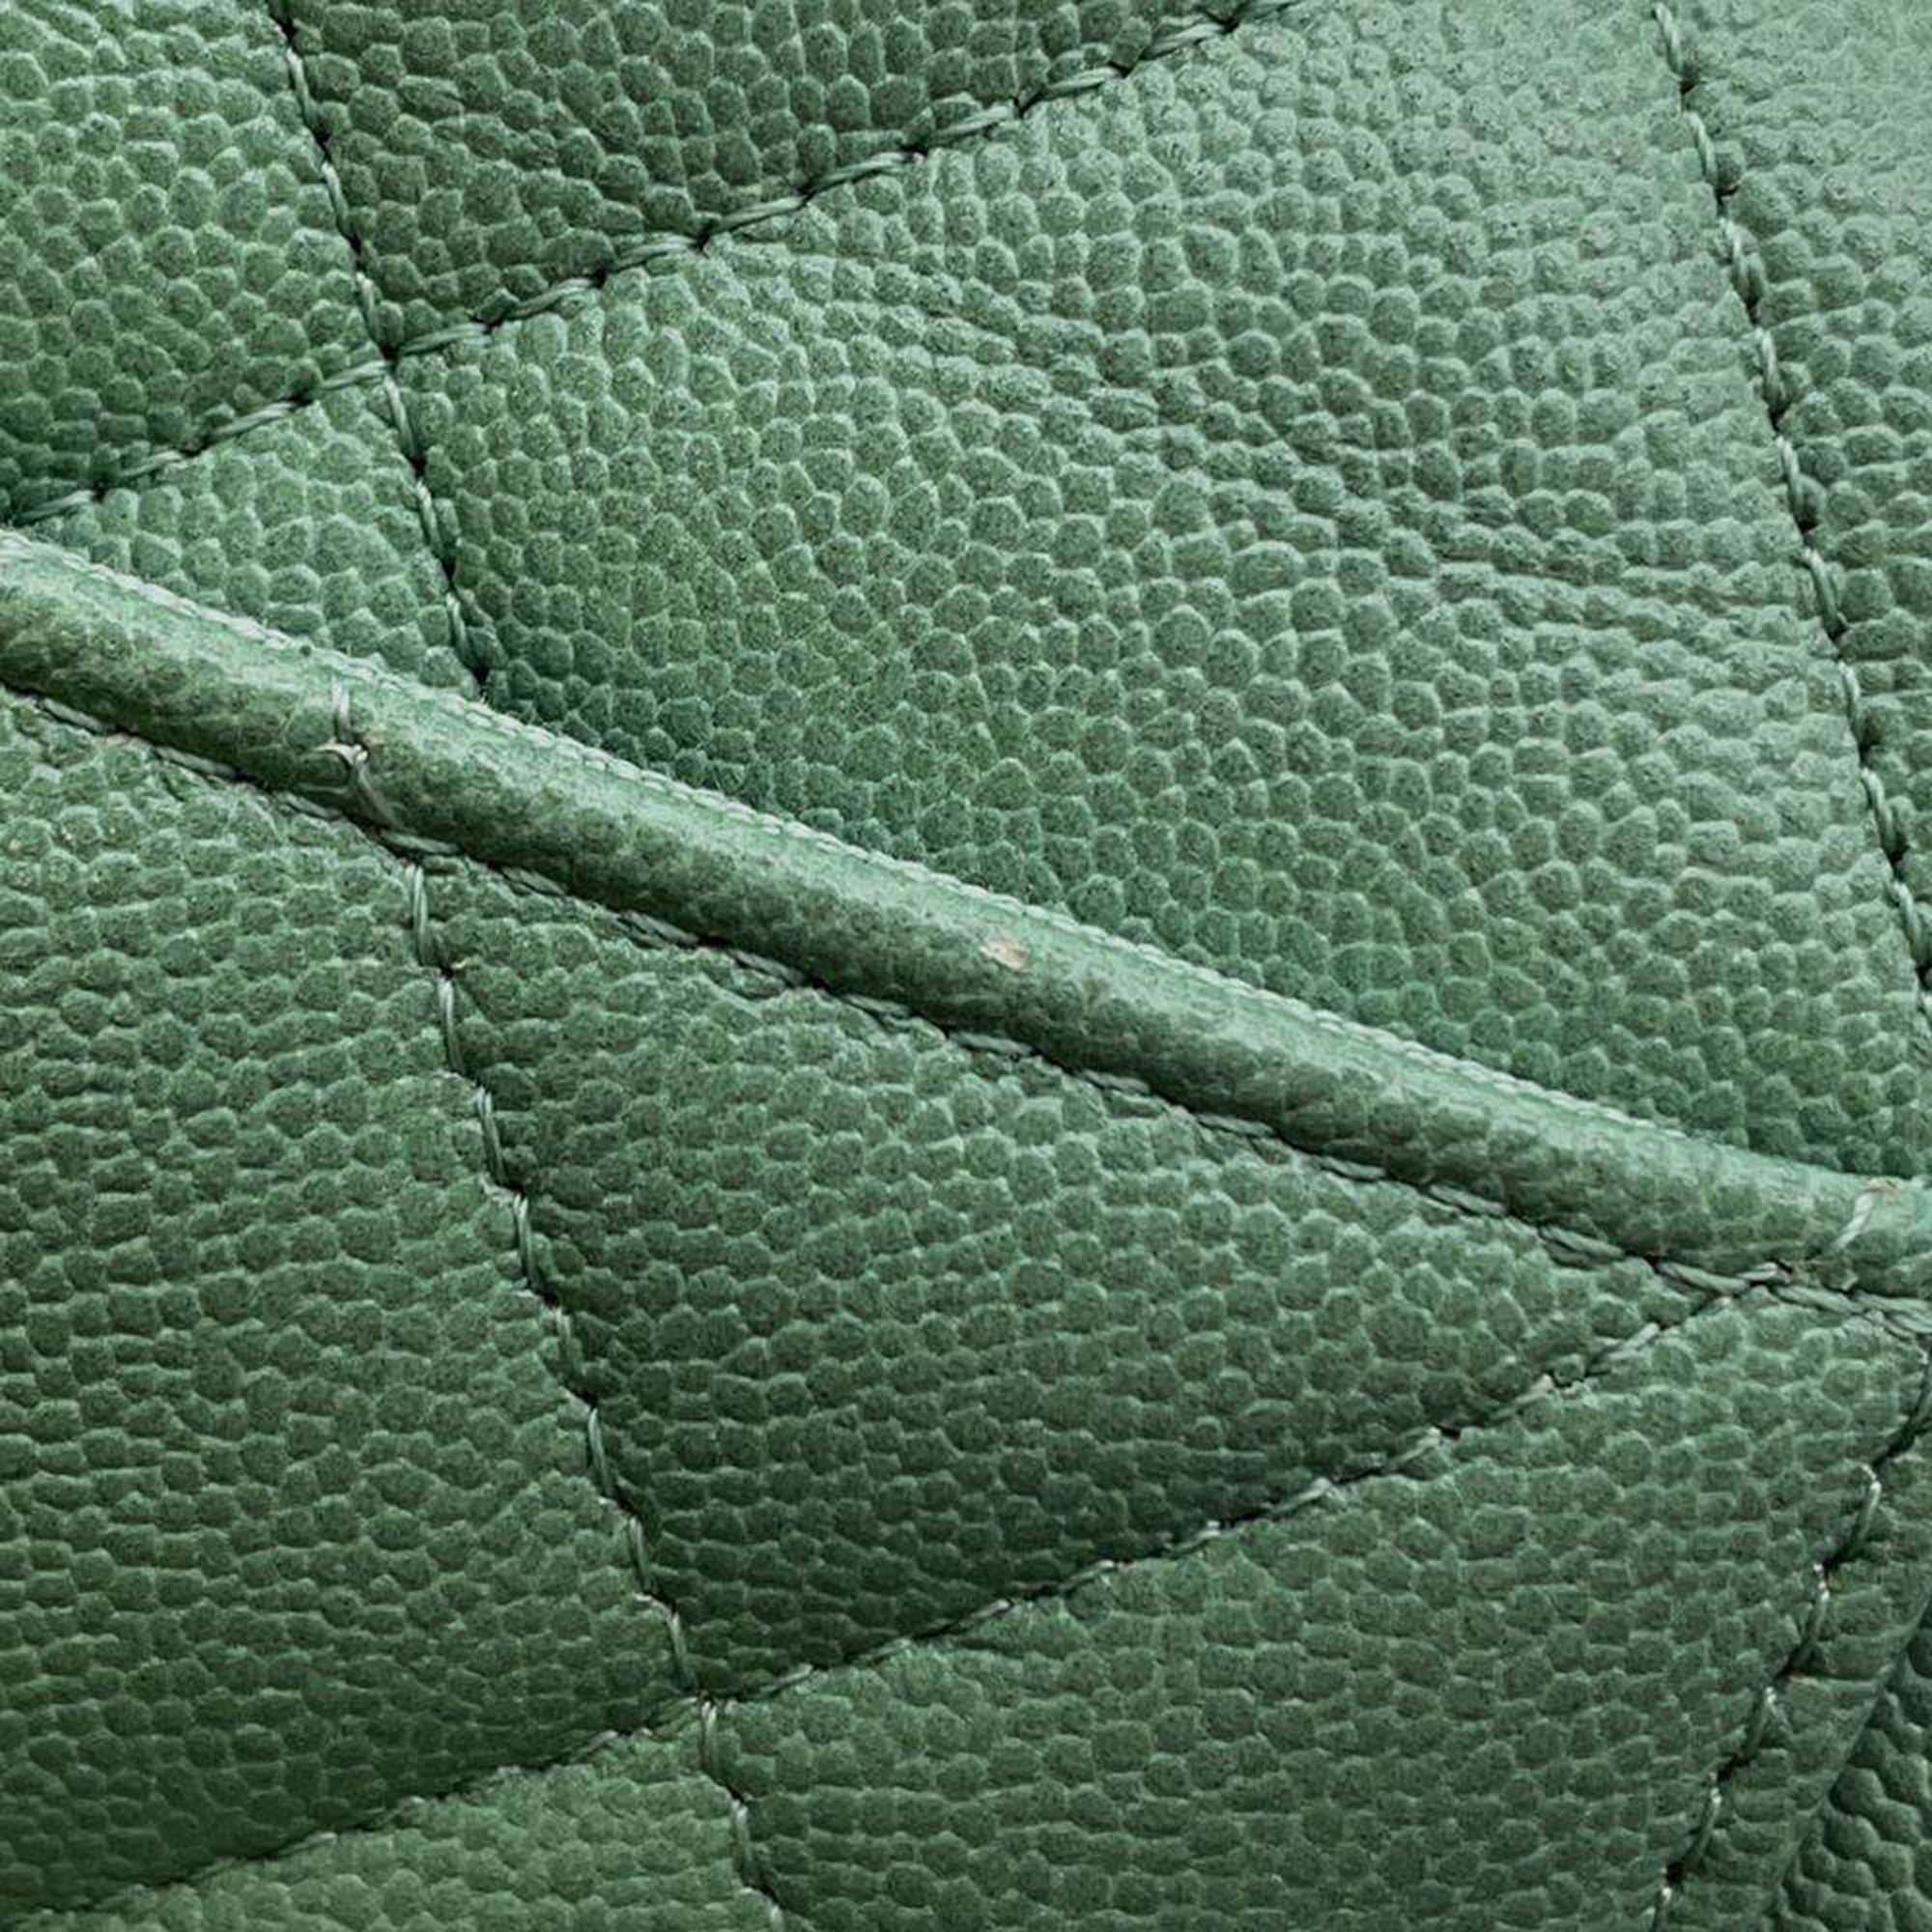 Chanel Green Leather Cc Flap Bag